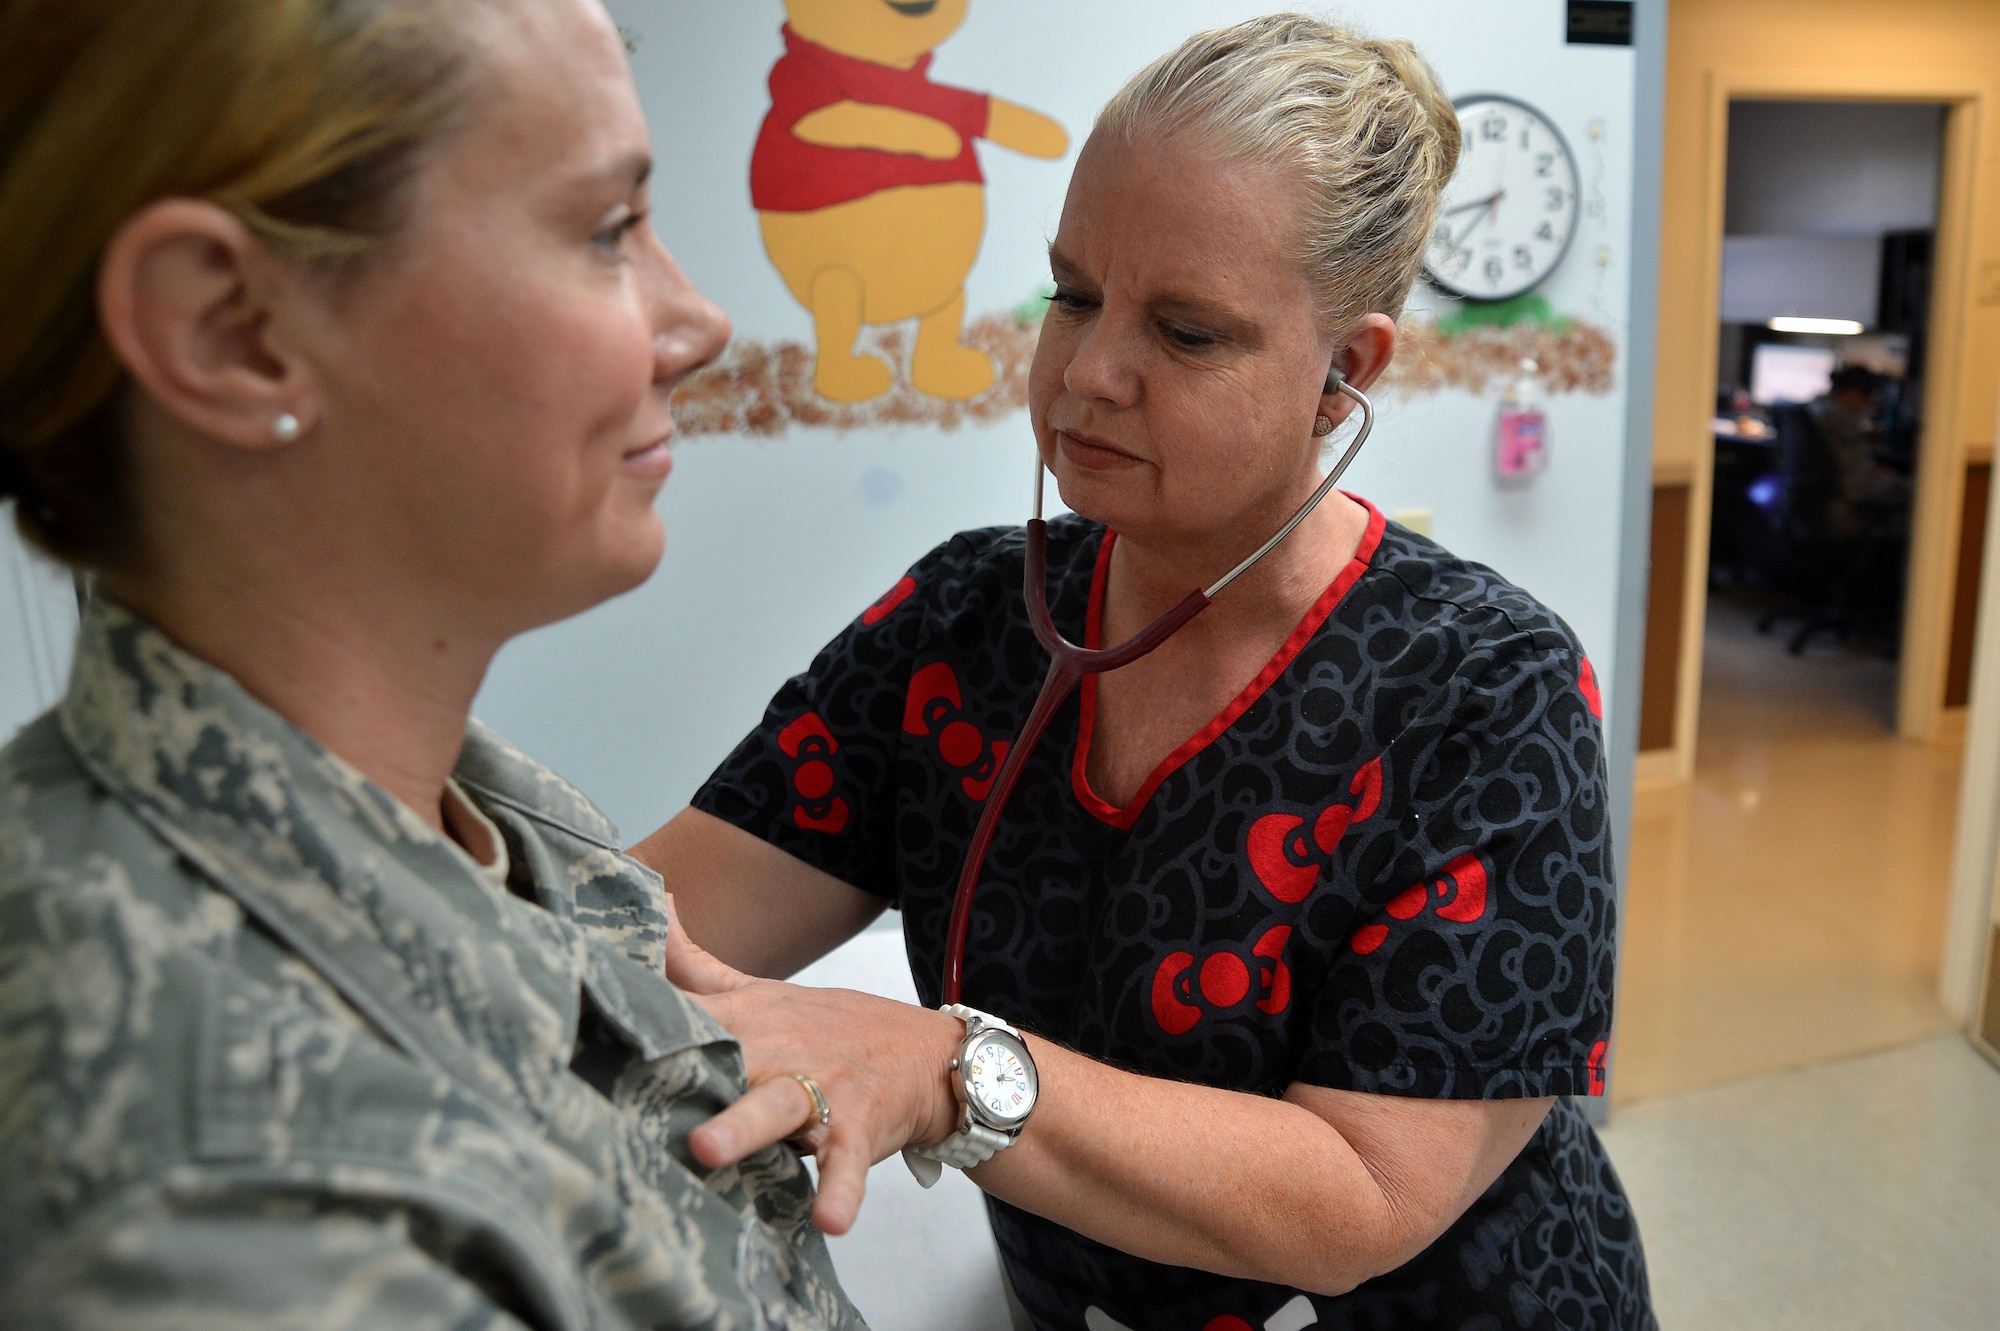 Debra Green, 20th Medical Operations Squadron pediatrics nurse, checks the heartbeat of Staff Sgt. Amanda Payne, 20th MDOS medical technician, at Shaw Air Force Base, S.C., May 12, 2015. Throughout the Air Force, May 6-12, nurses and medical technicians were recognized for the care they provide to service members and their families. (U.S. Air Force photo by Airman 1st Class Michael Cossaboom/Released)